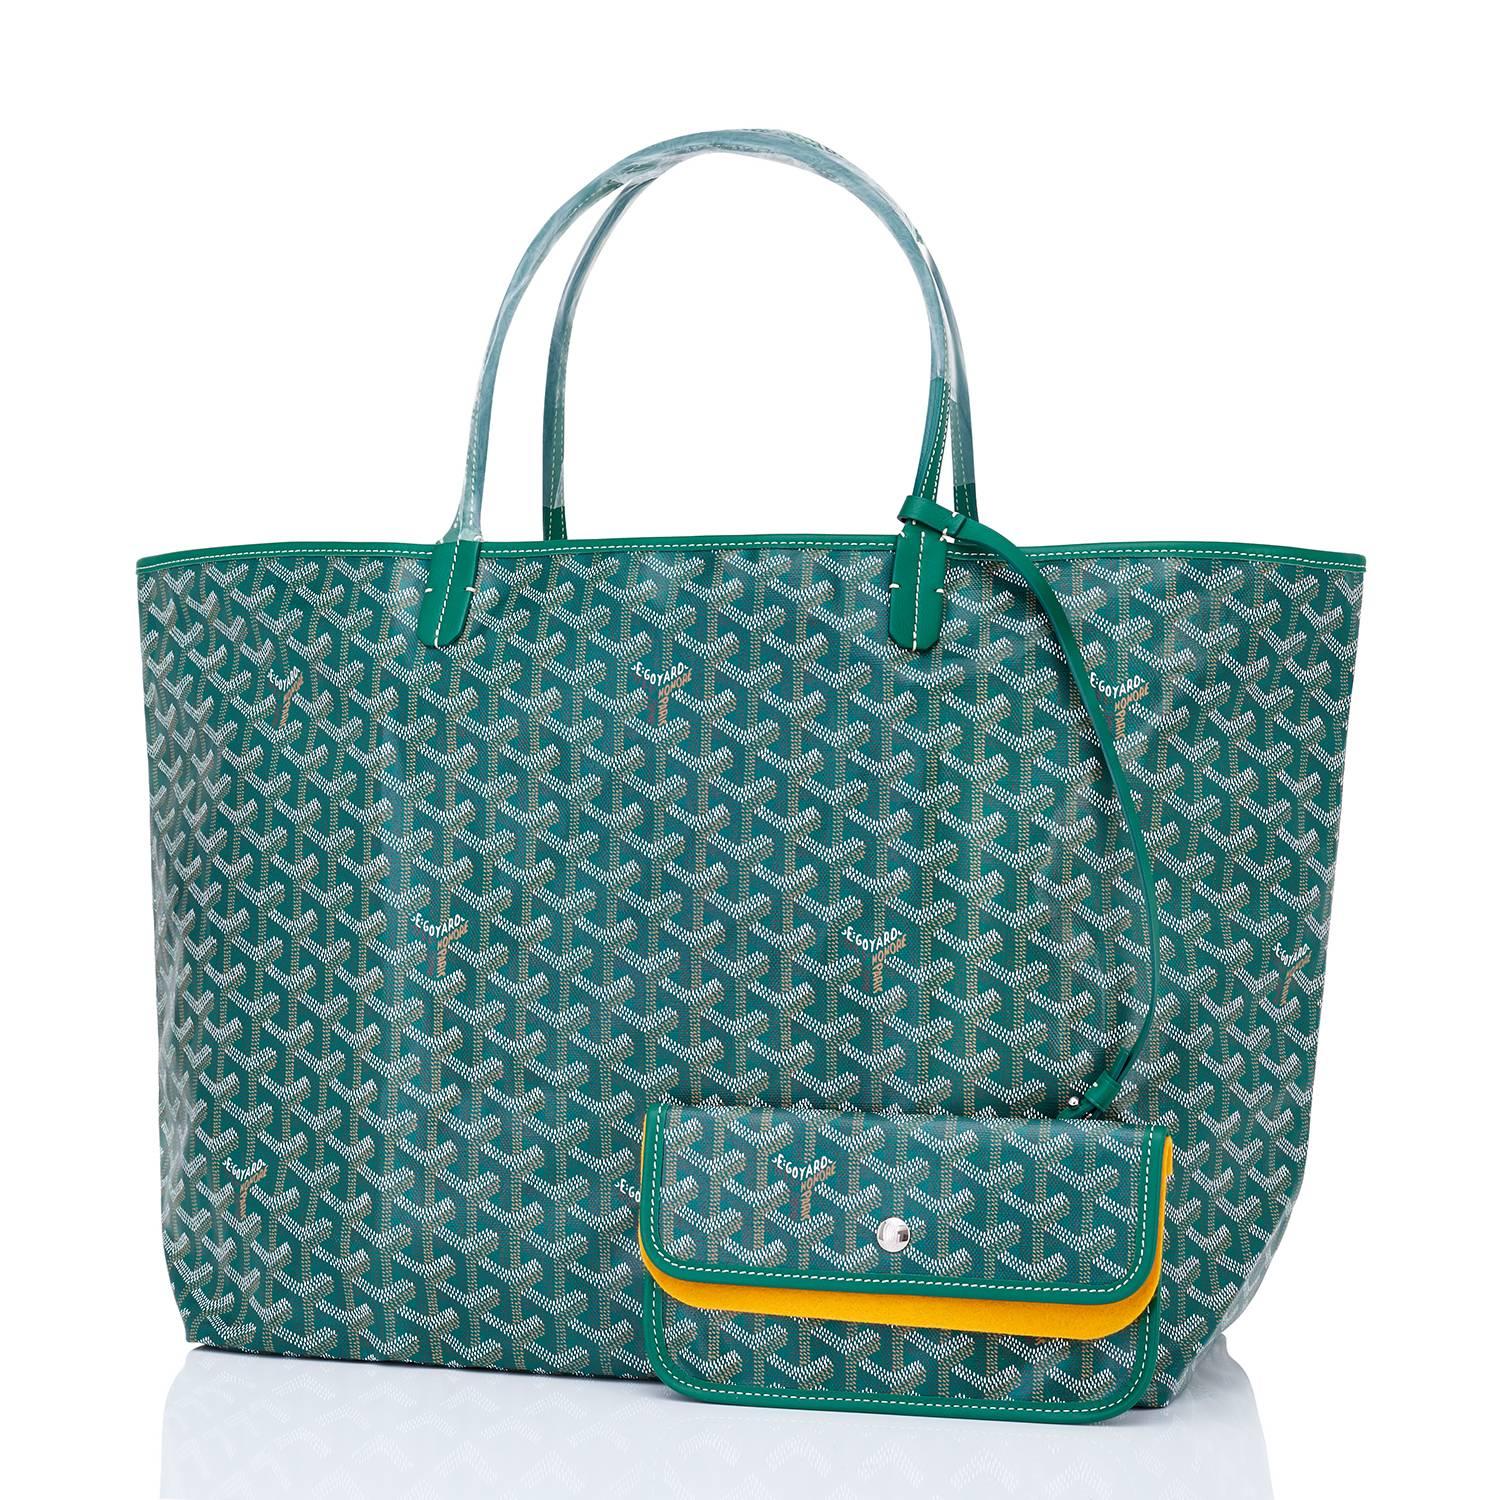 Goyard Tote St Louis Hunter Green Chevron Bag GM
Brand New.  Store Fresh. Pristine Condition (with plastic on handles)
Perfect gift! Comes with yellow Goyard sleeper, inner organizational pochette with inner yellow protective felt.
This is the